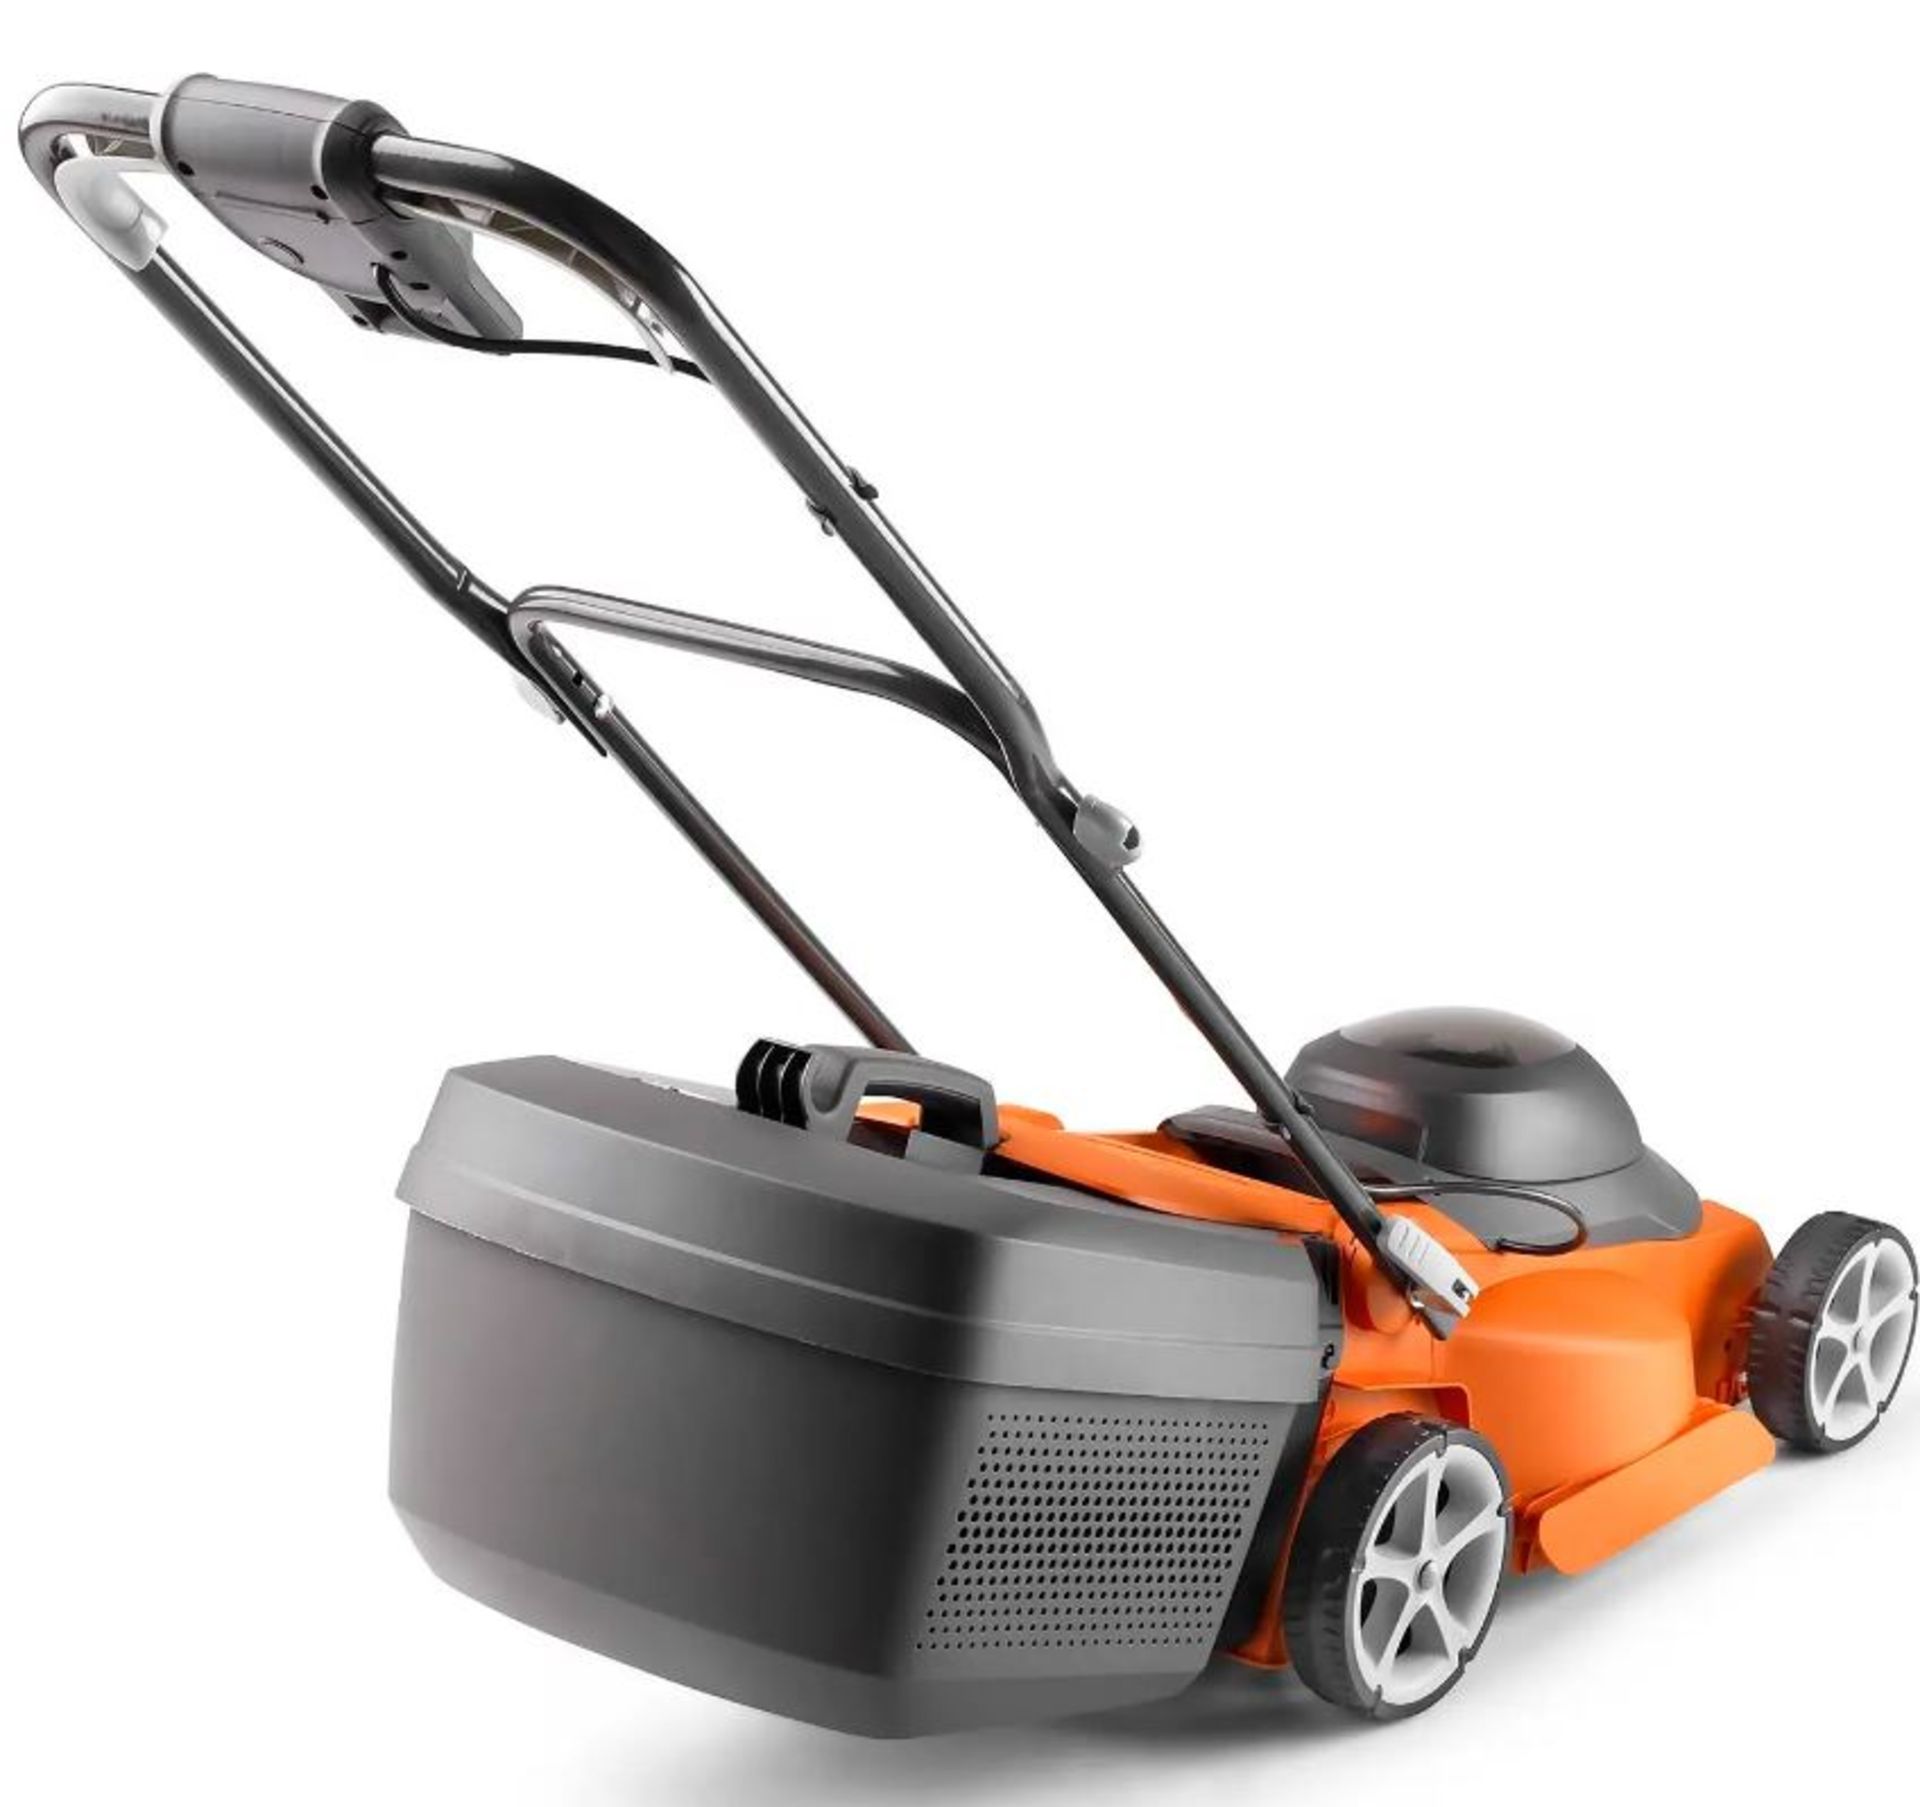 (R1H) 1x Flymo EasiStore 340R Li 40V Cordless Lawn Mower RRP £230. (With Battery & Charger). - Image 2 of 3